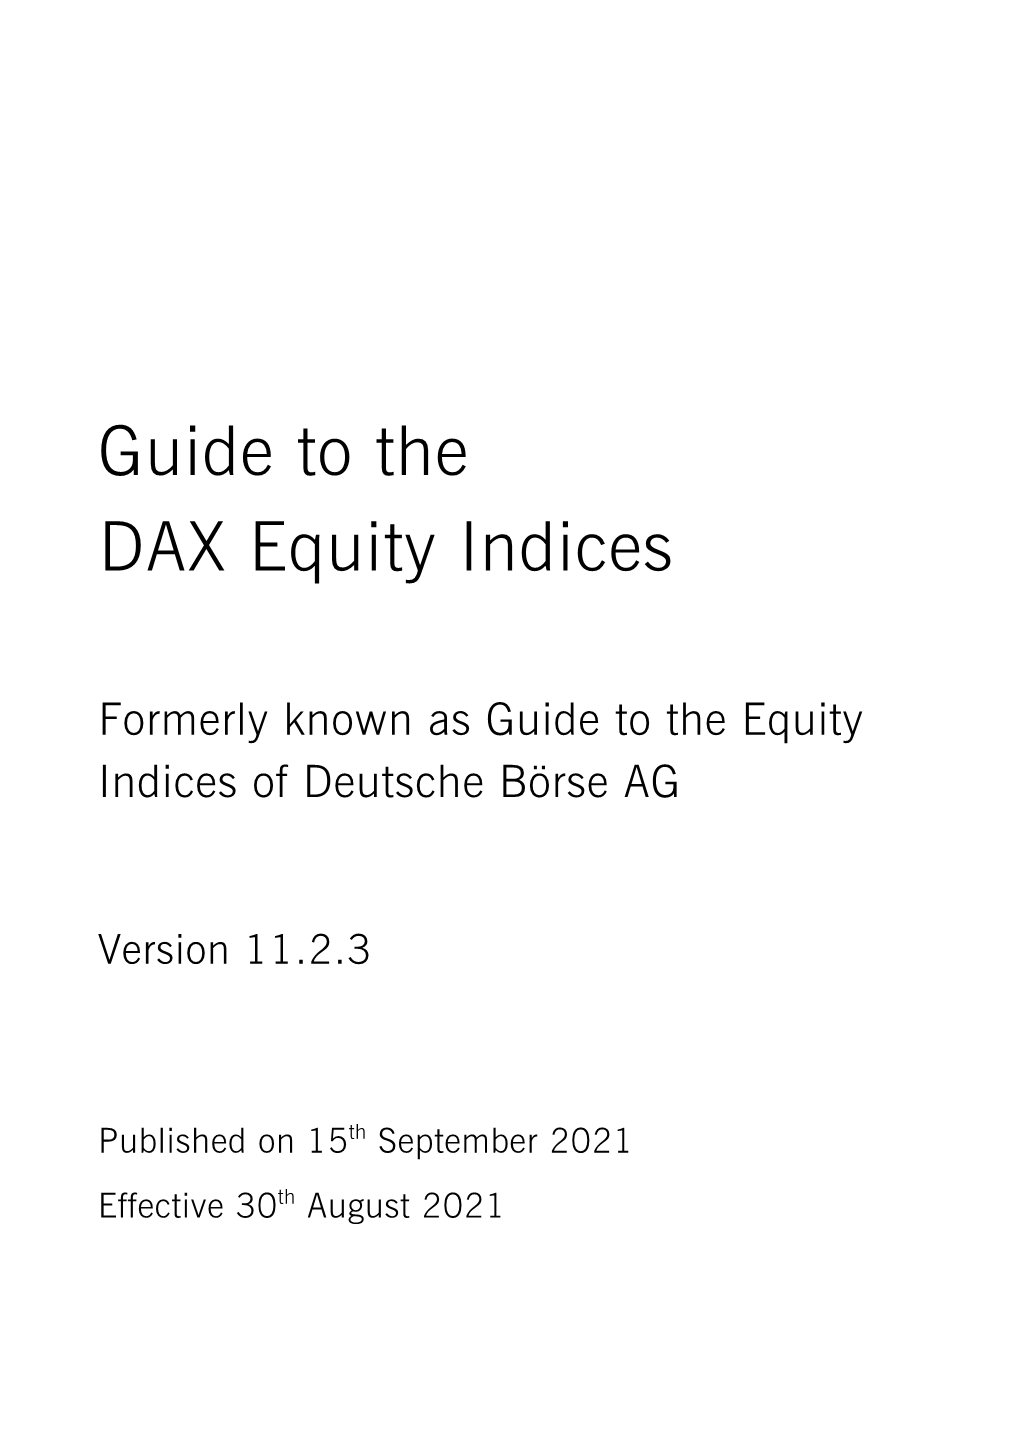 Guide to the DAX Equity Indices